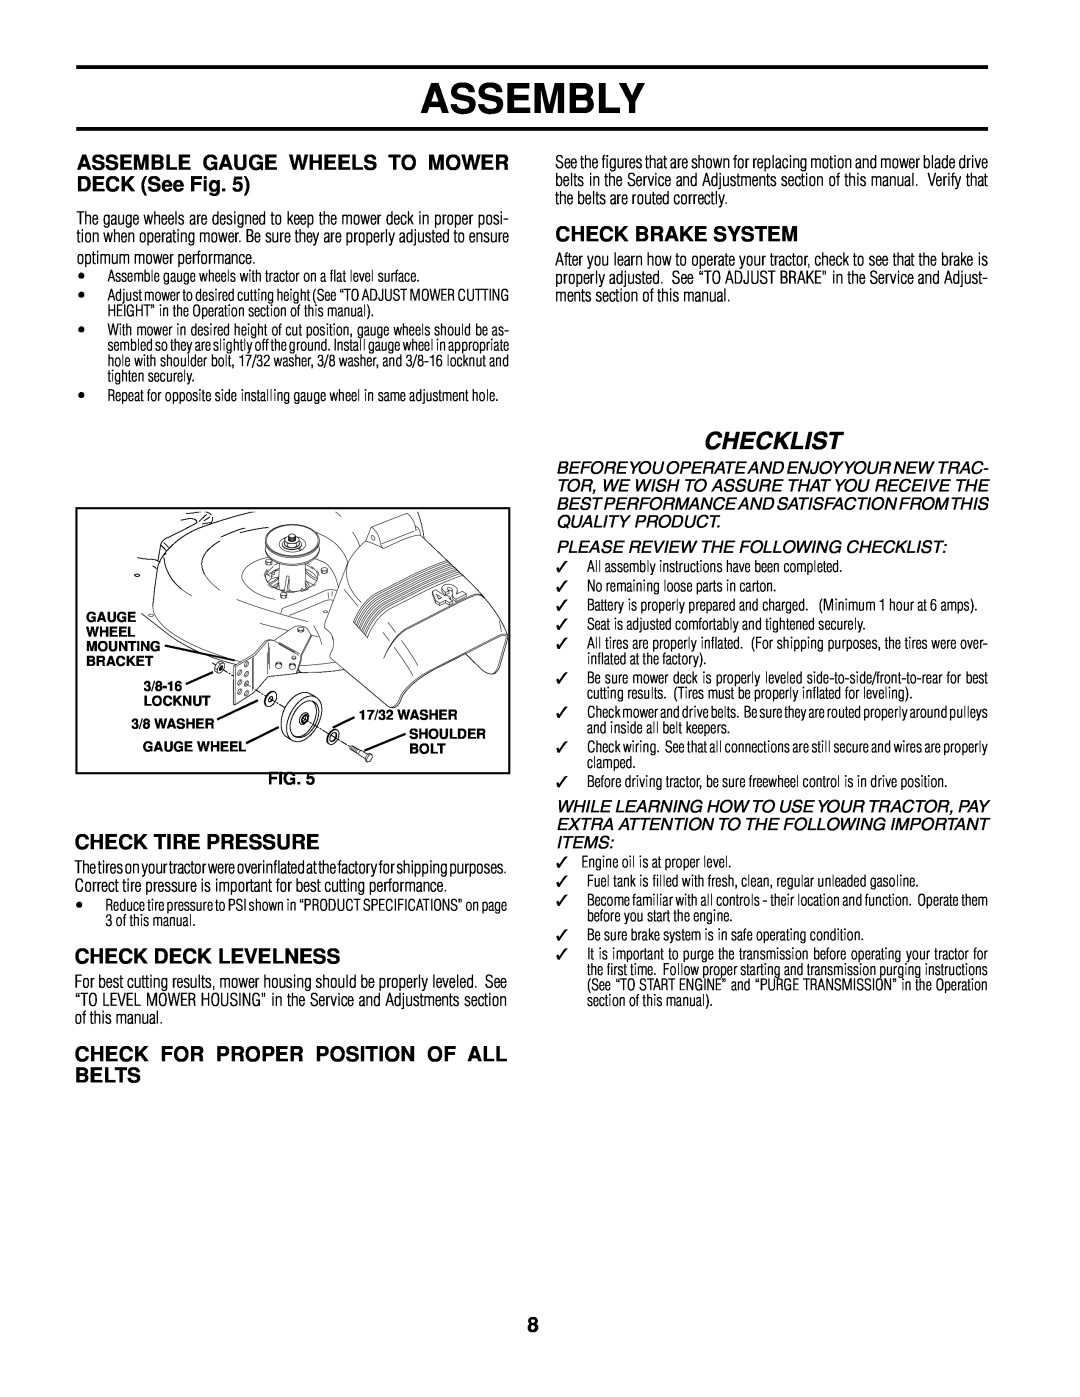 Poulan 161608 Assembly, Checklist, ASSEMBLE GAUGE WHEELS TO MOWER DECK See Fig, Check Brake System, Check Tire Pressure 